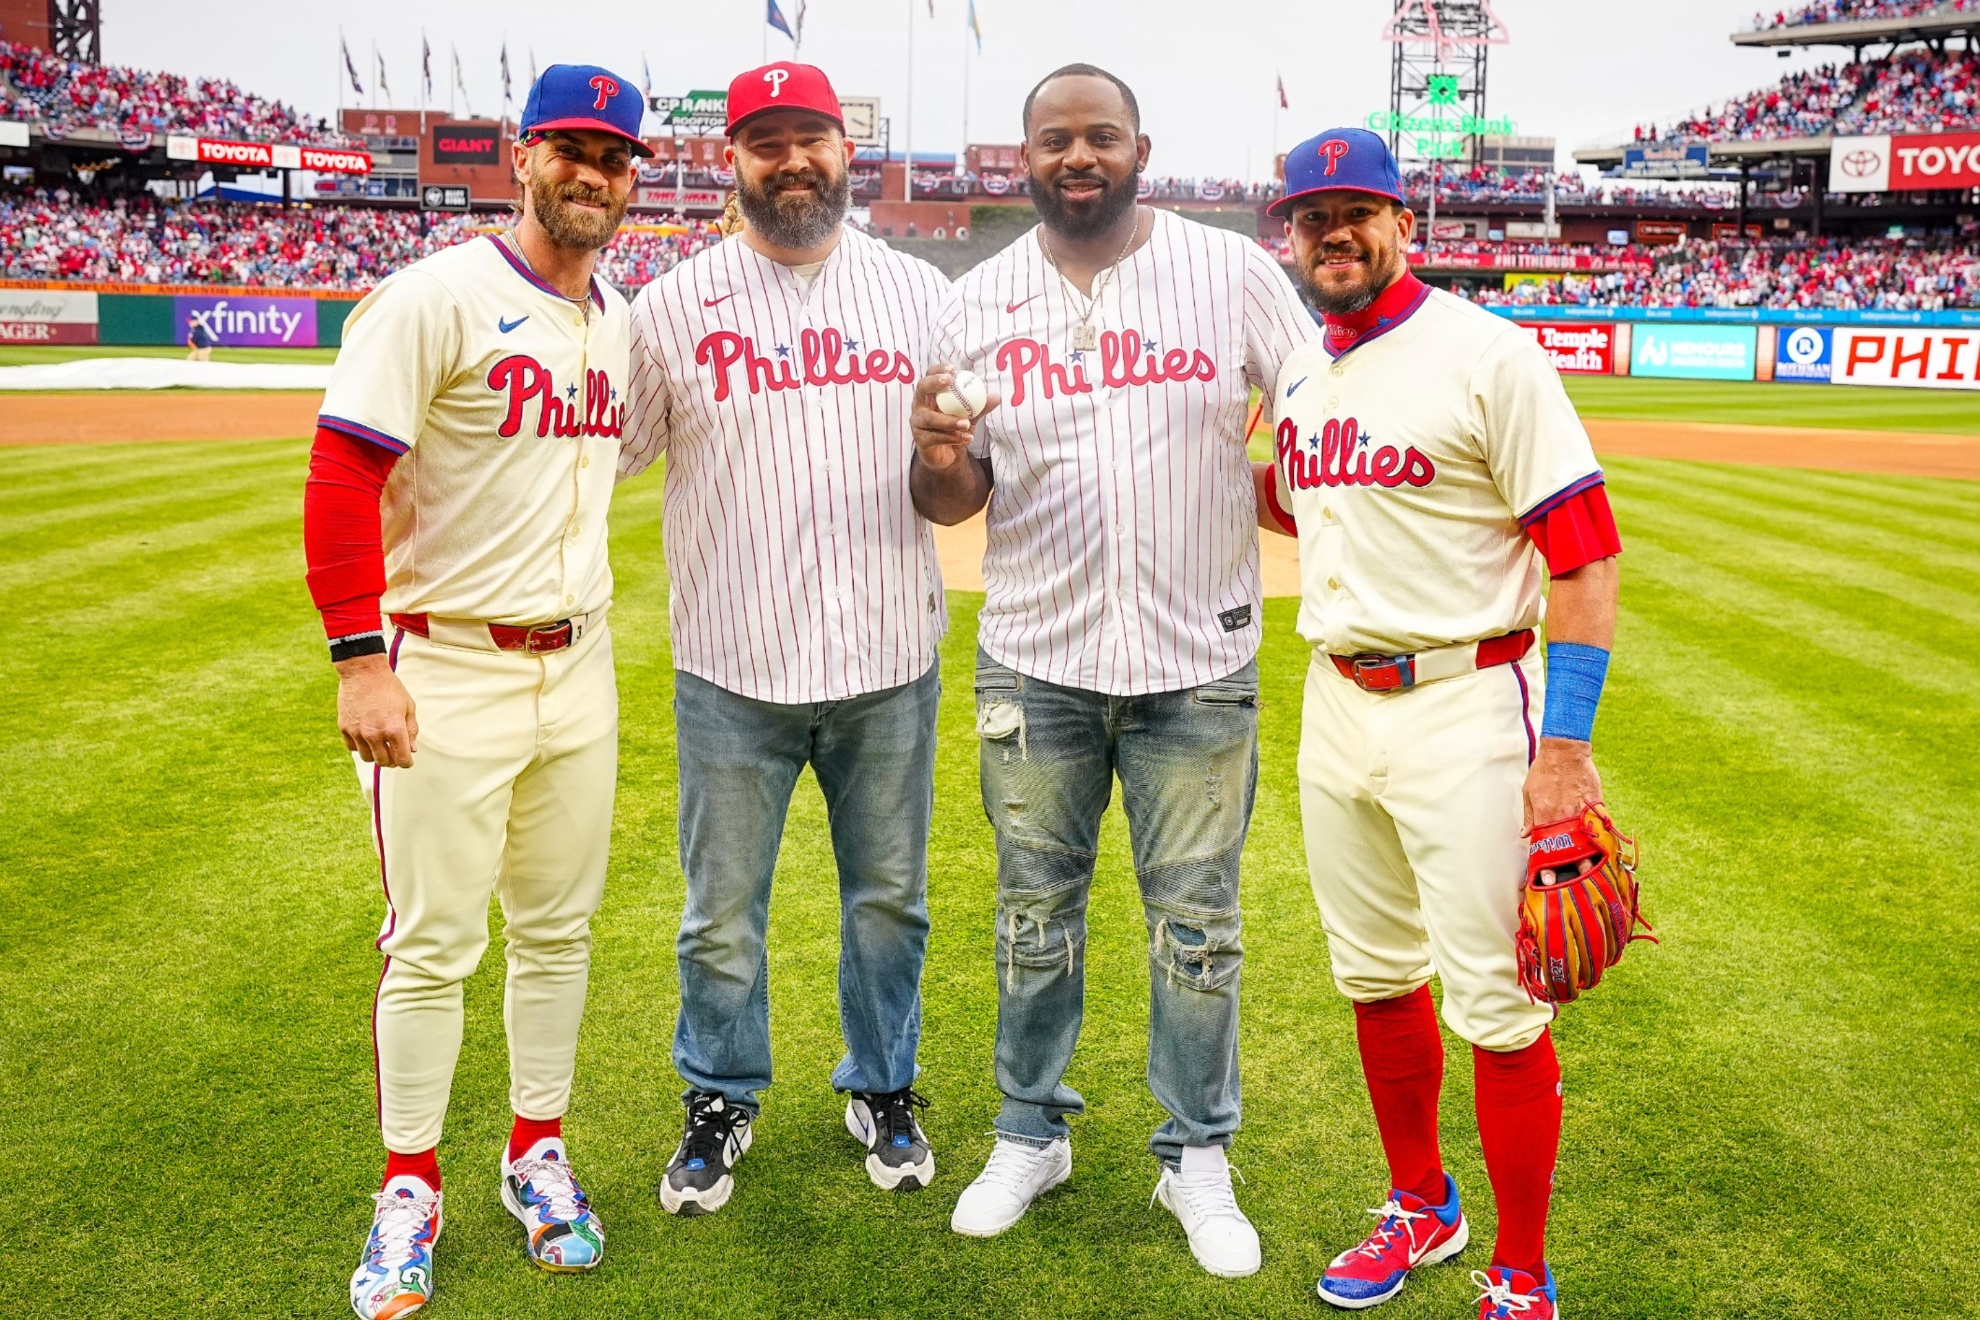 Jason Kelce and Fletcher Cox threw the first pitch at the Philadelphia Phillies game on Saturday